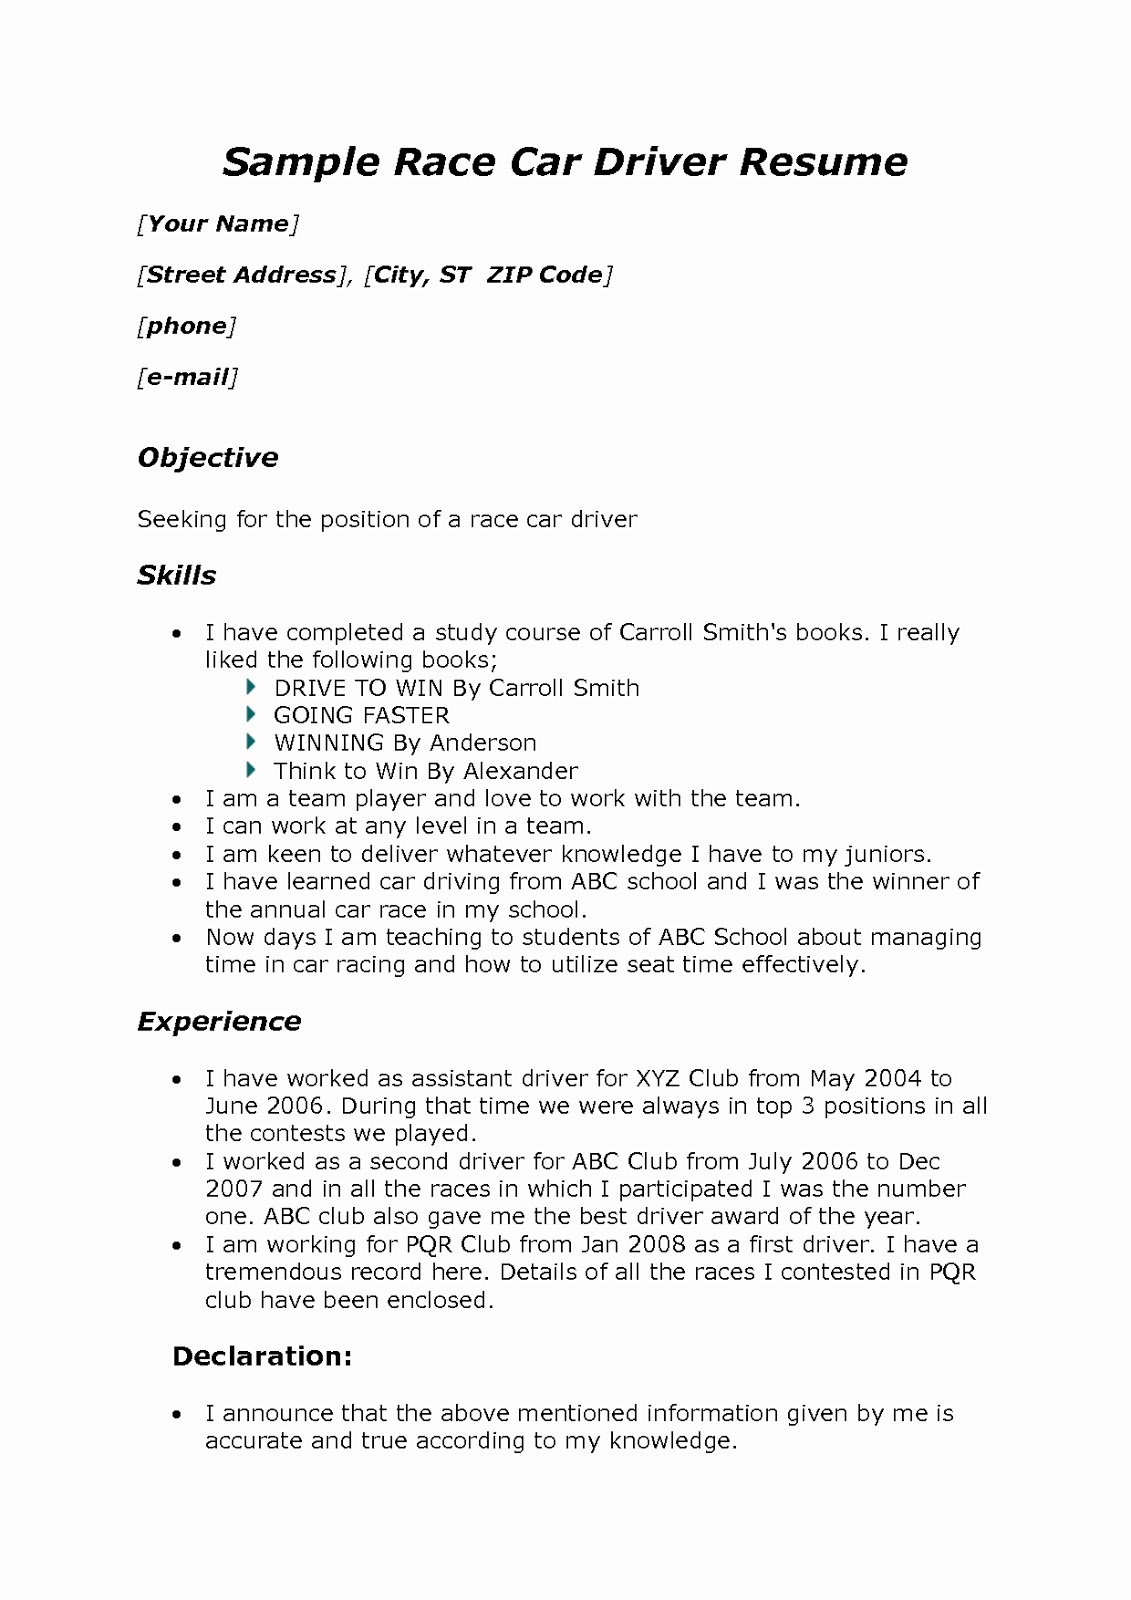 truck driver resume objective , truck driver resume objective statement 2019 , truck driver resume samples 2020, truck driver resume template word, truck driver resume template australia, cdl truck driver resume objective, dump truck driver resume objective tow truck driver resume objective entry level truck driver resume